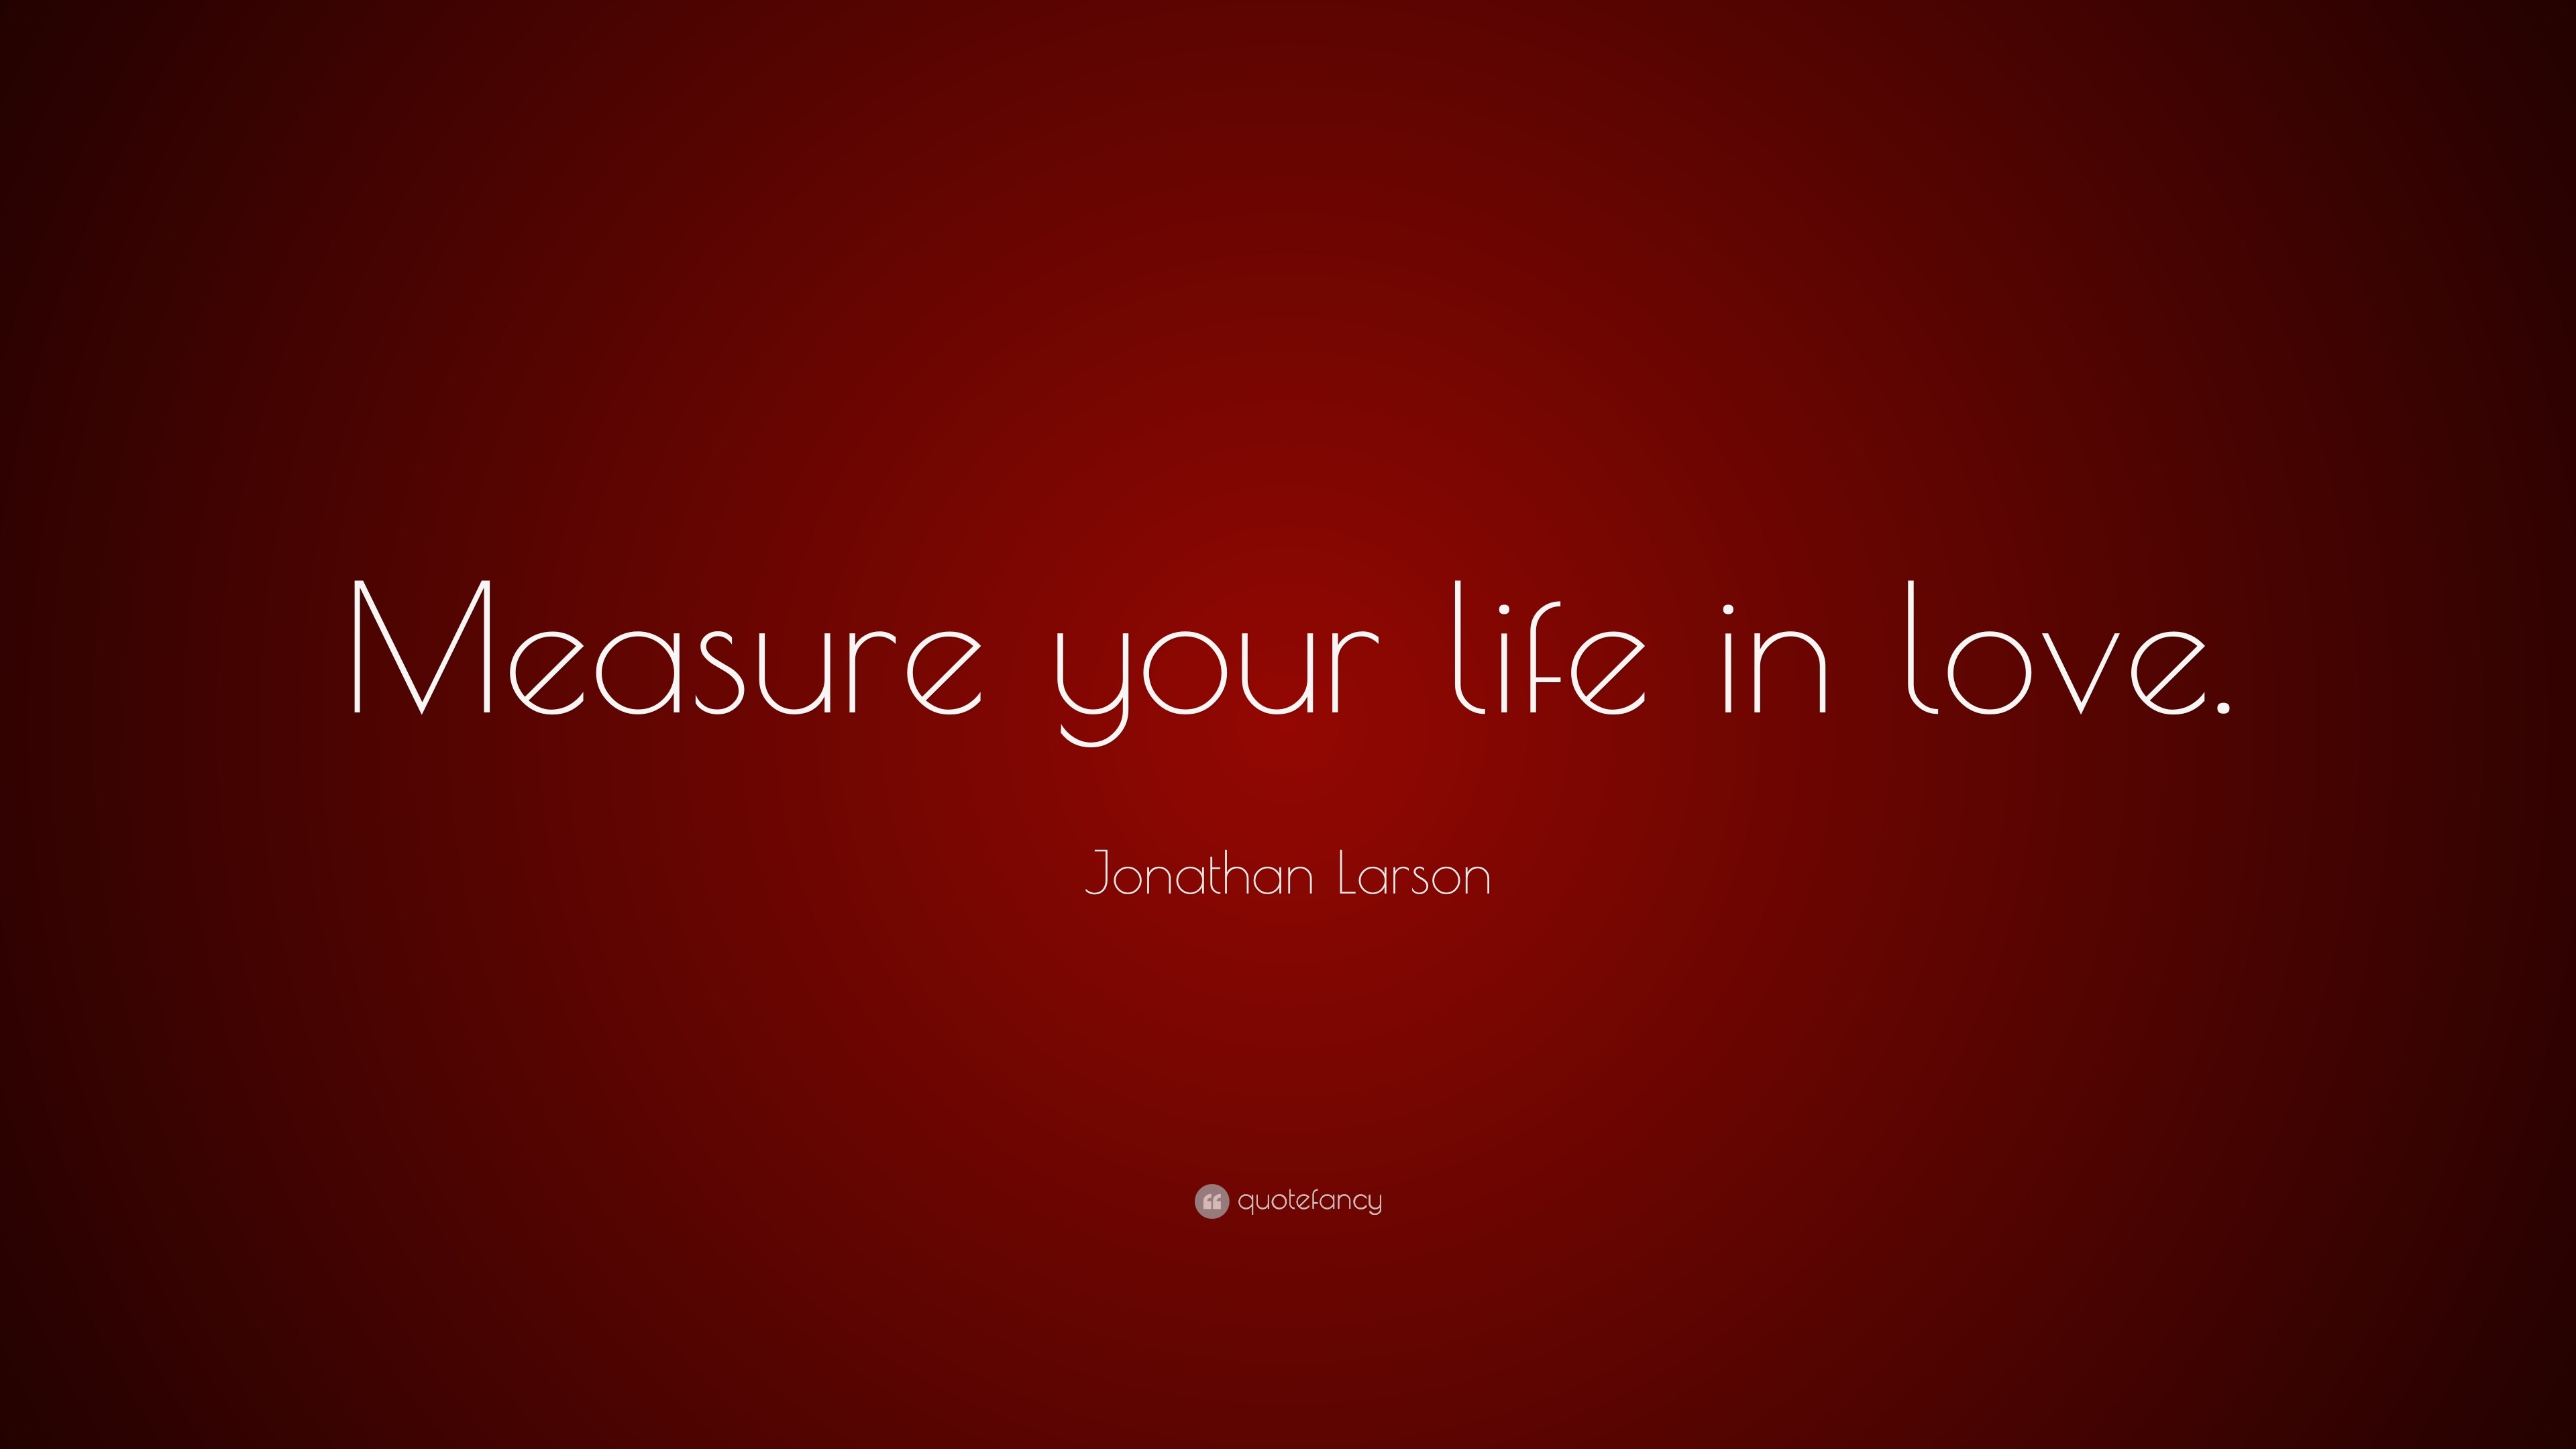 Jonathan Larson Quote “Measure your life in love ”